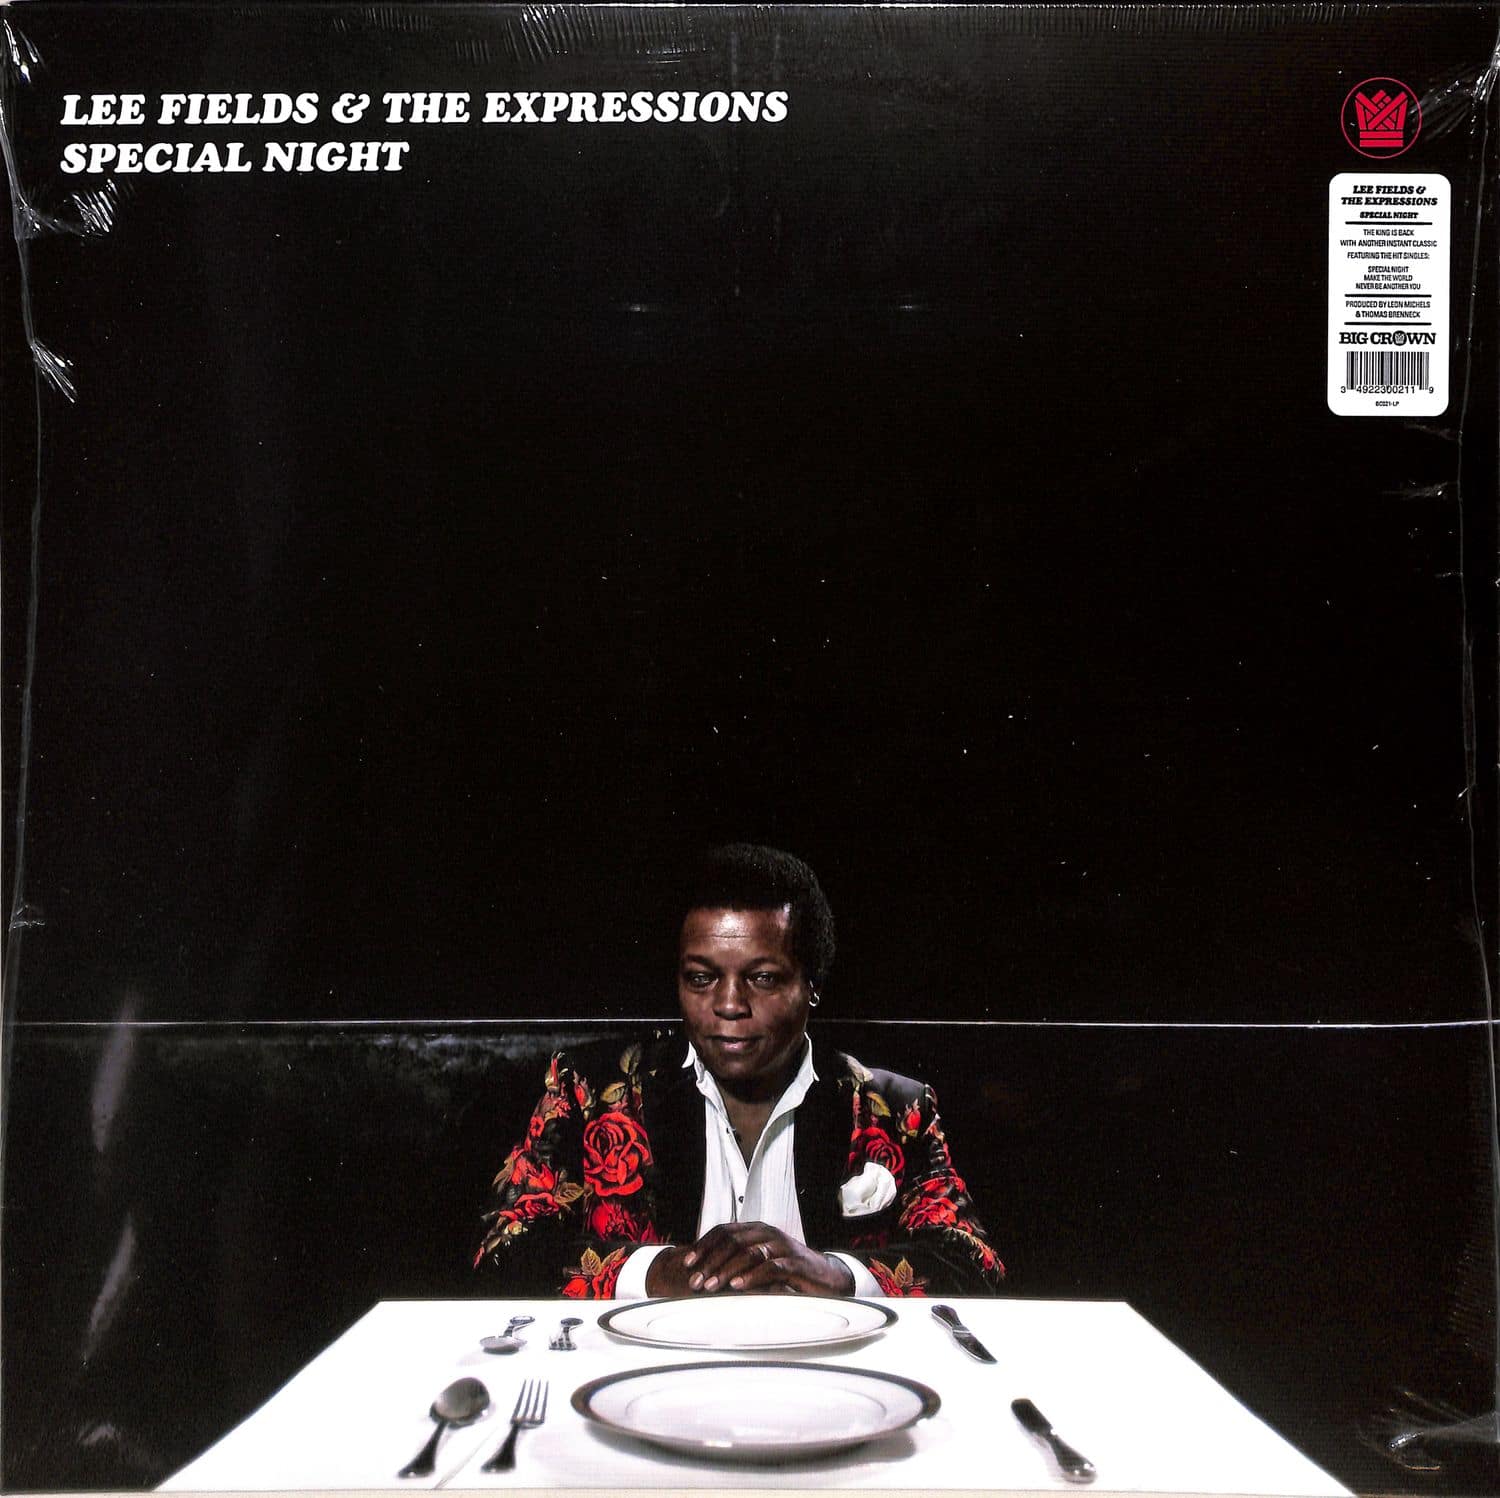 Lee Fields & The Expressions - SPECIAL NIGHT 